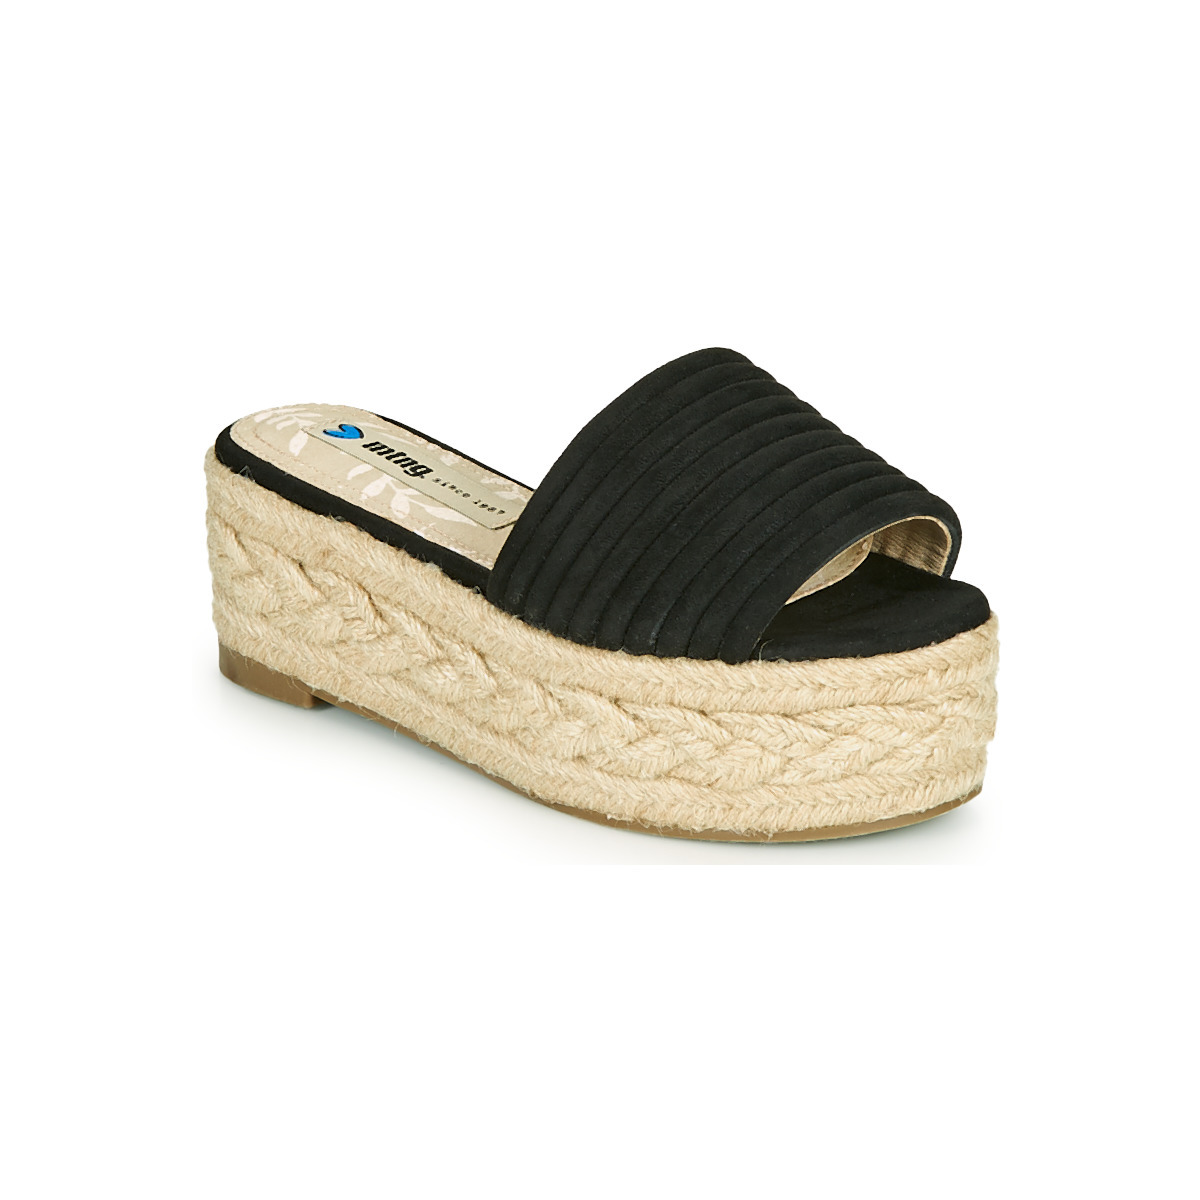 Spartoo - Women's Slippers in Black - Mtng GOOFASH